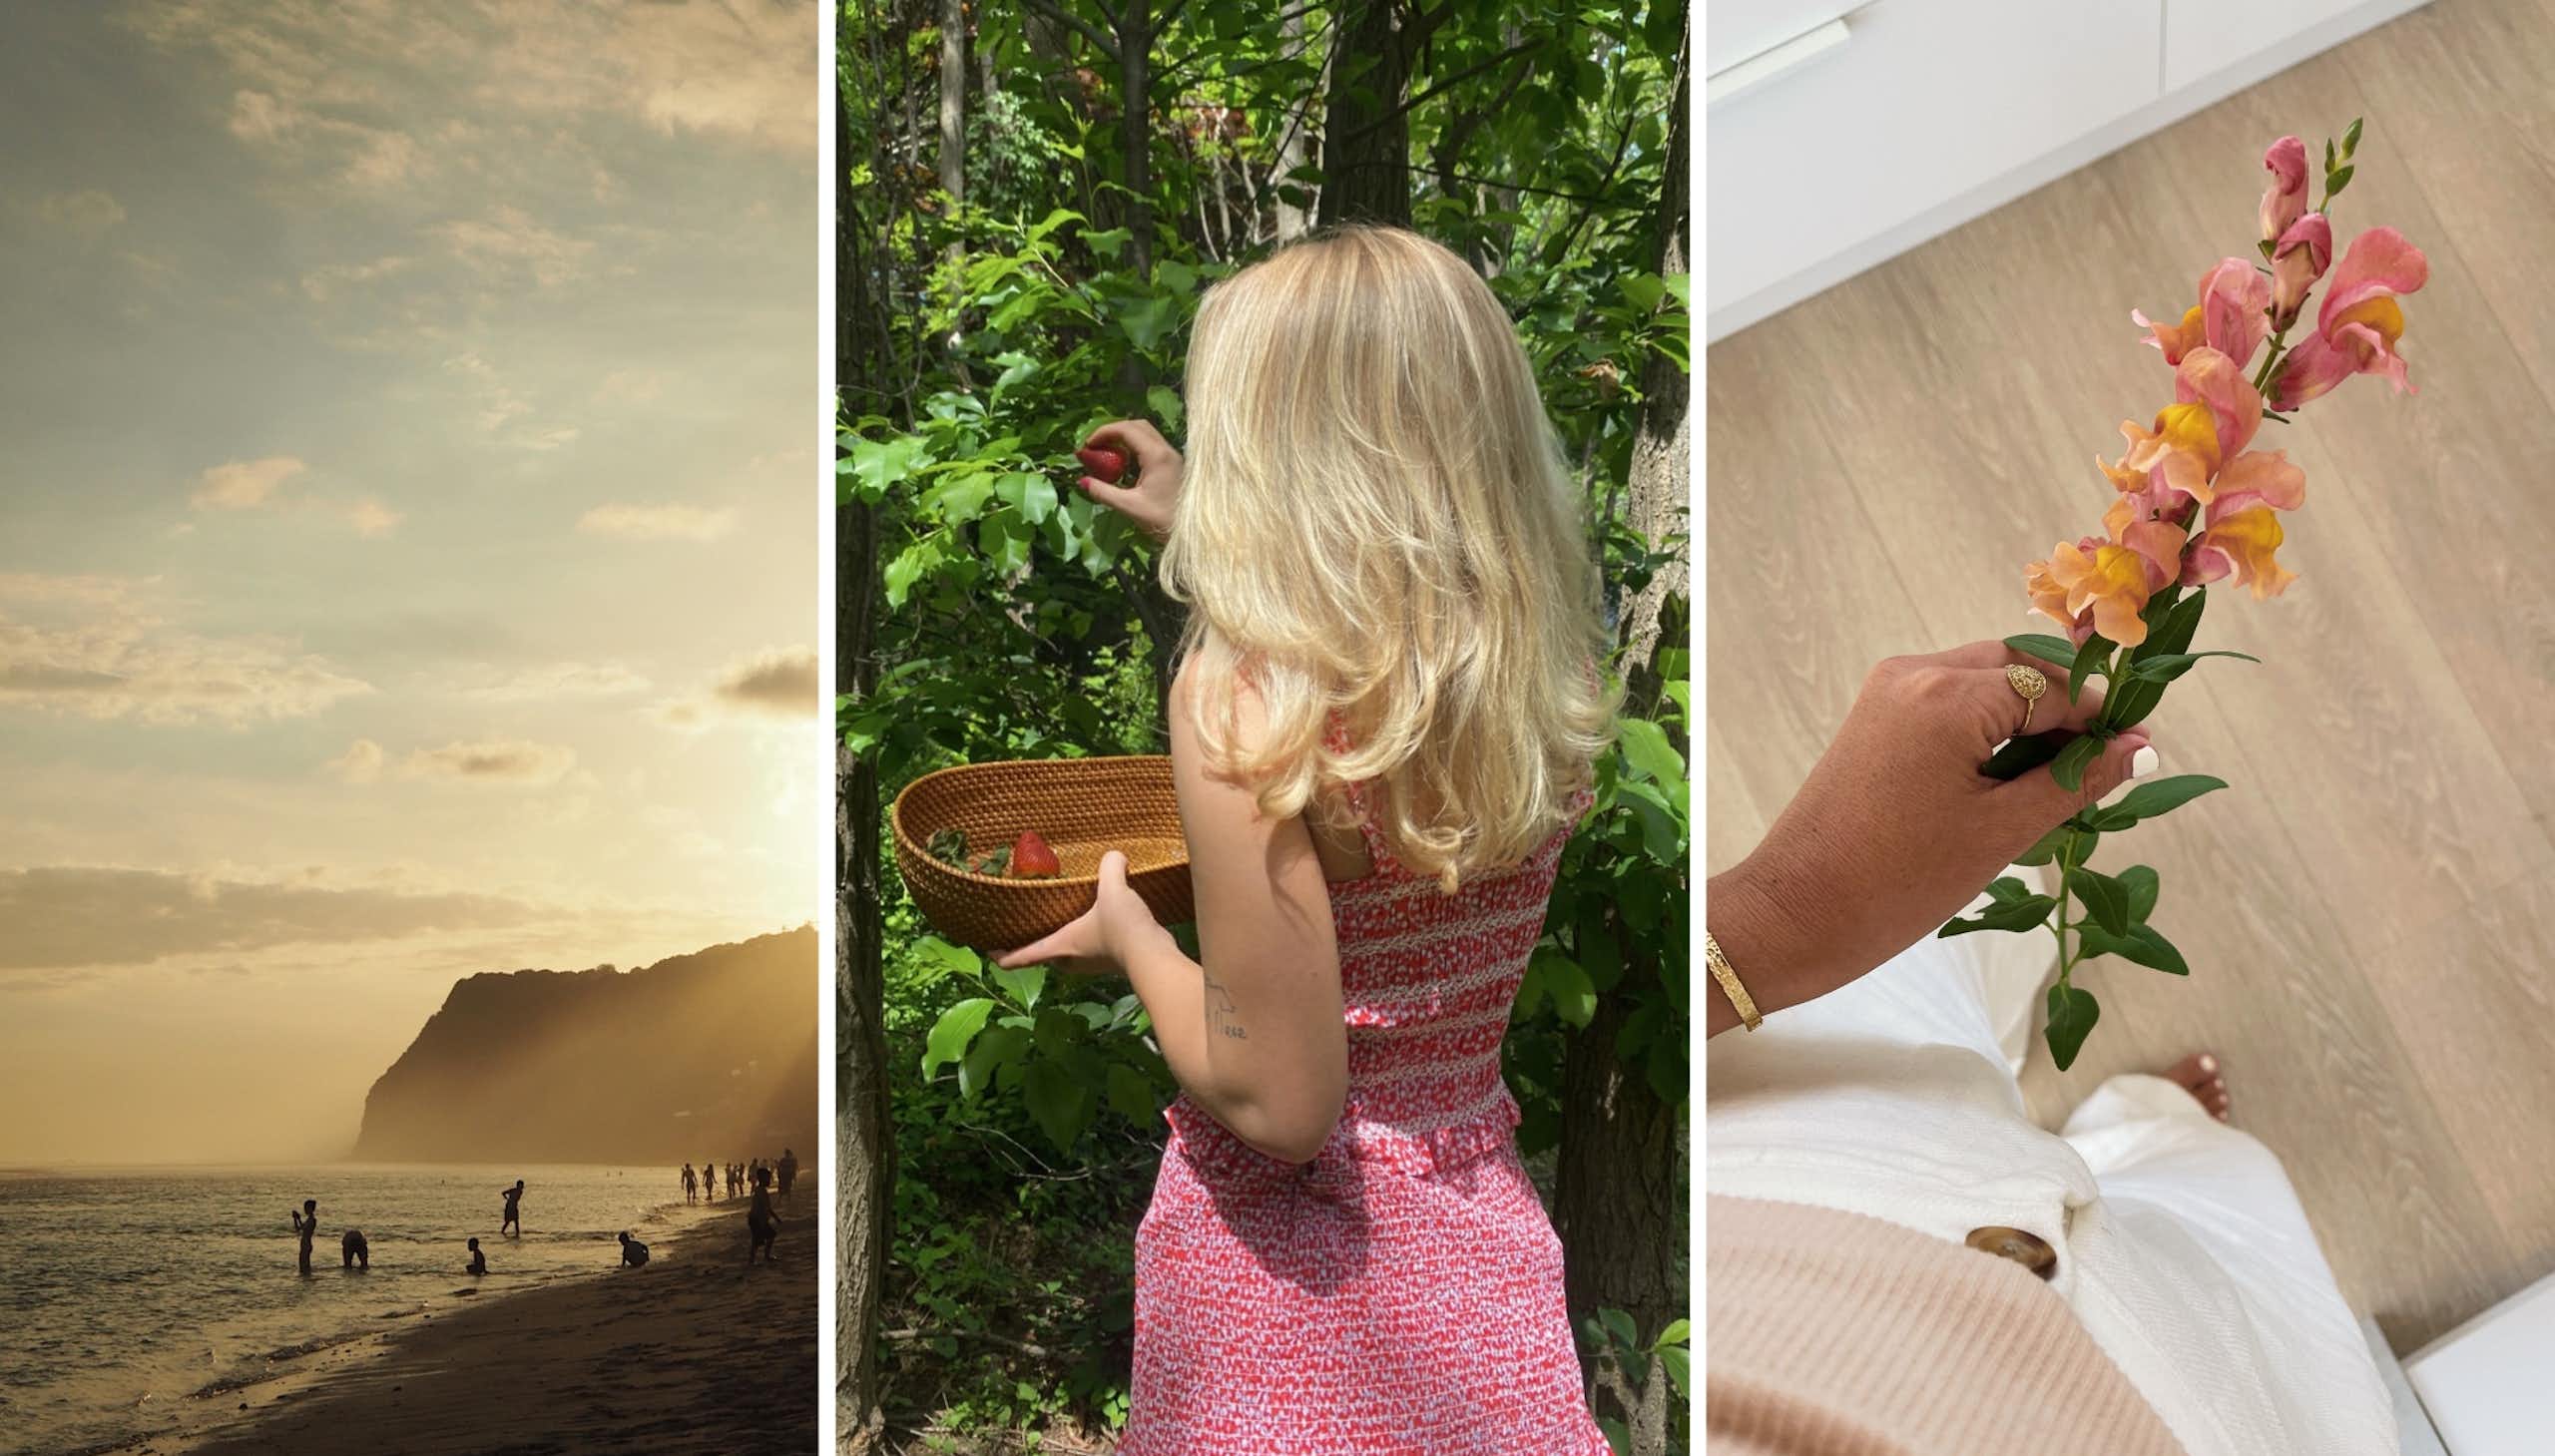 Three photos, one of a beach at sunset, one of a girl picking strawberries and one of a hand holding a flower. 